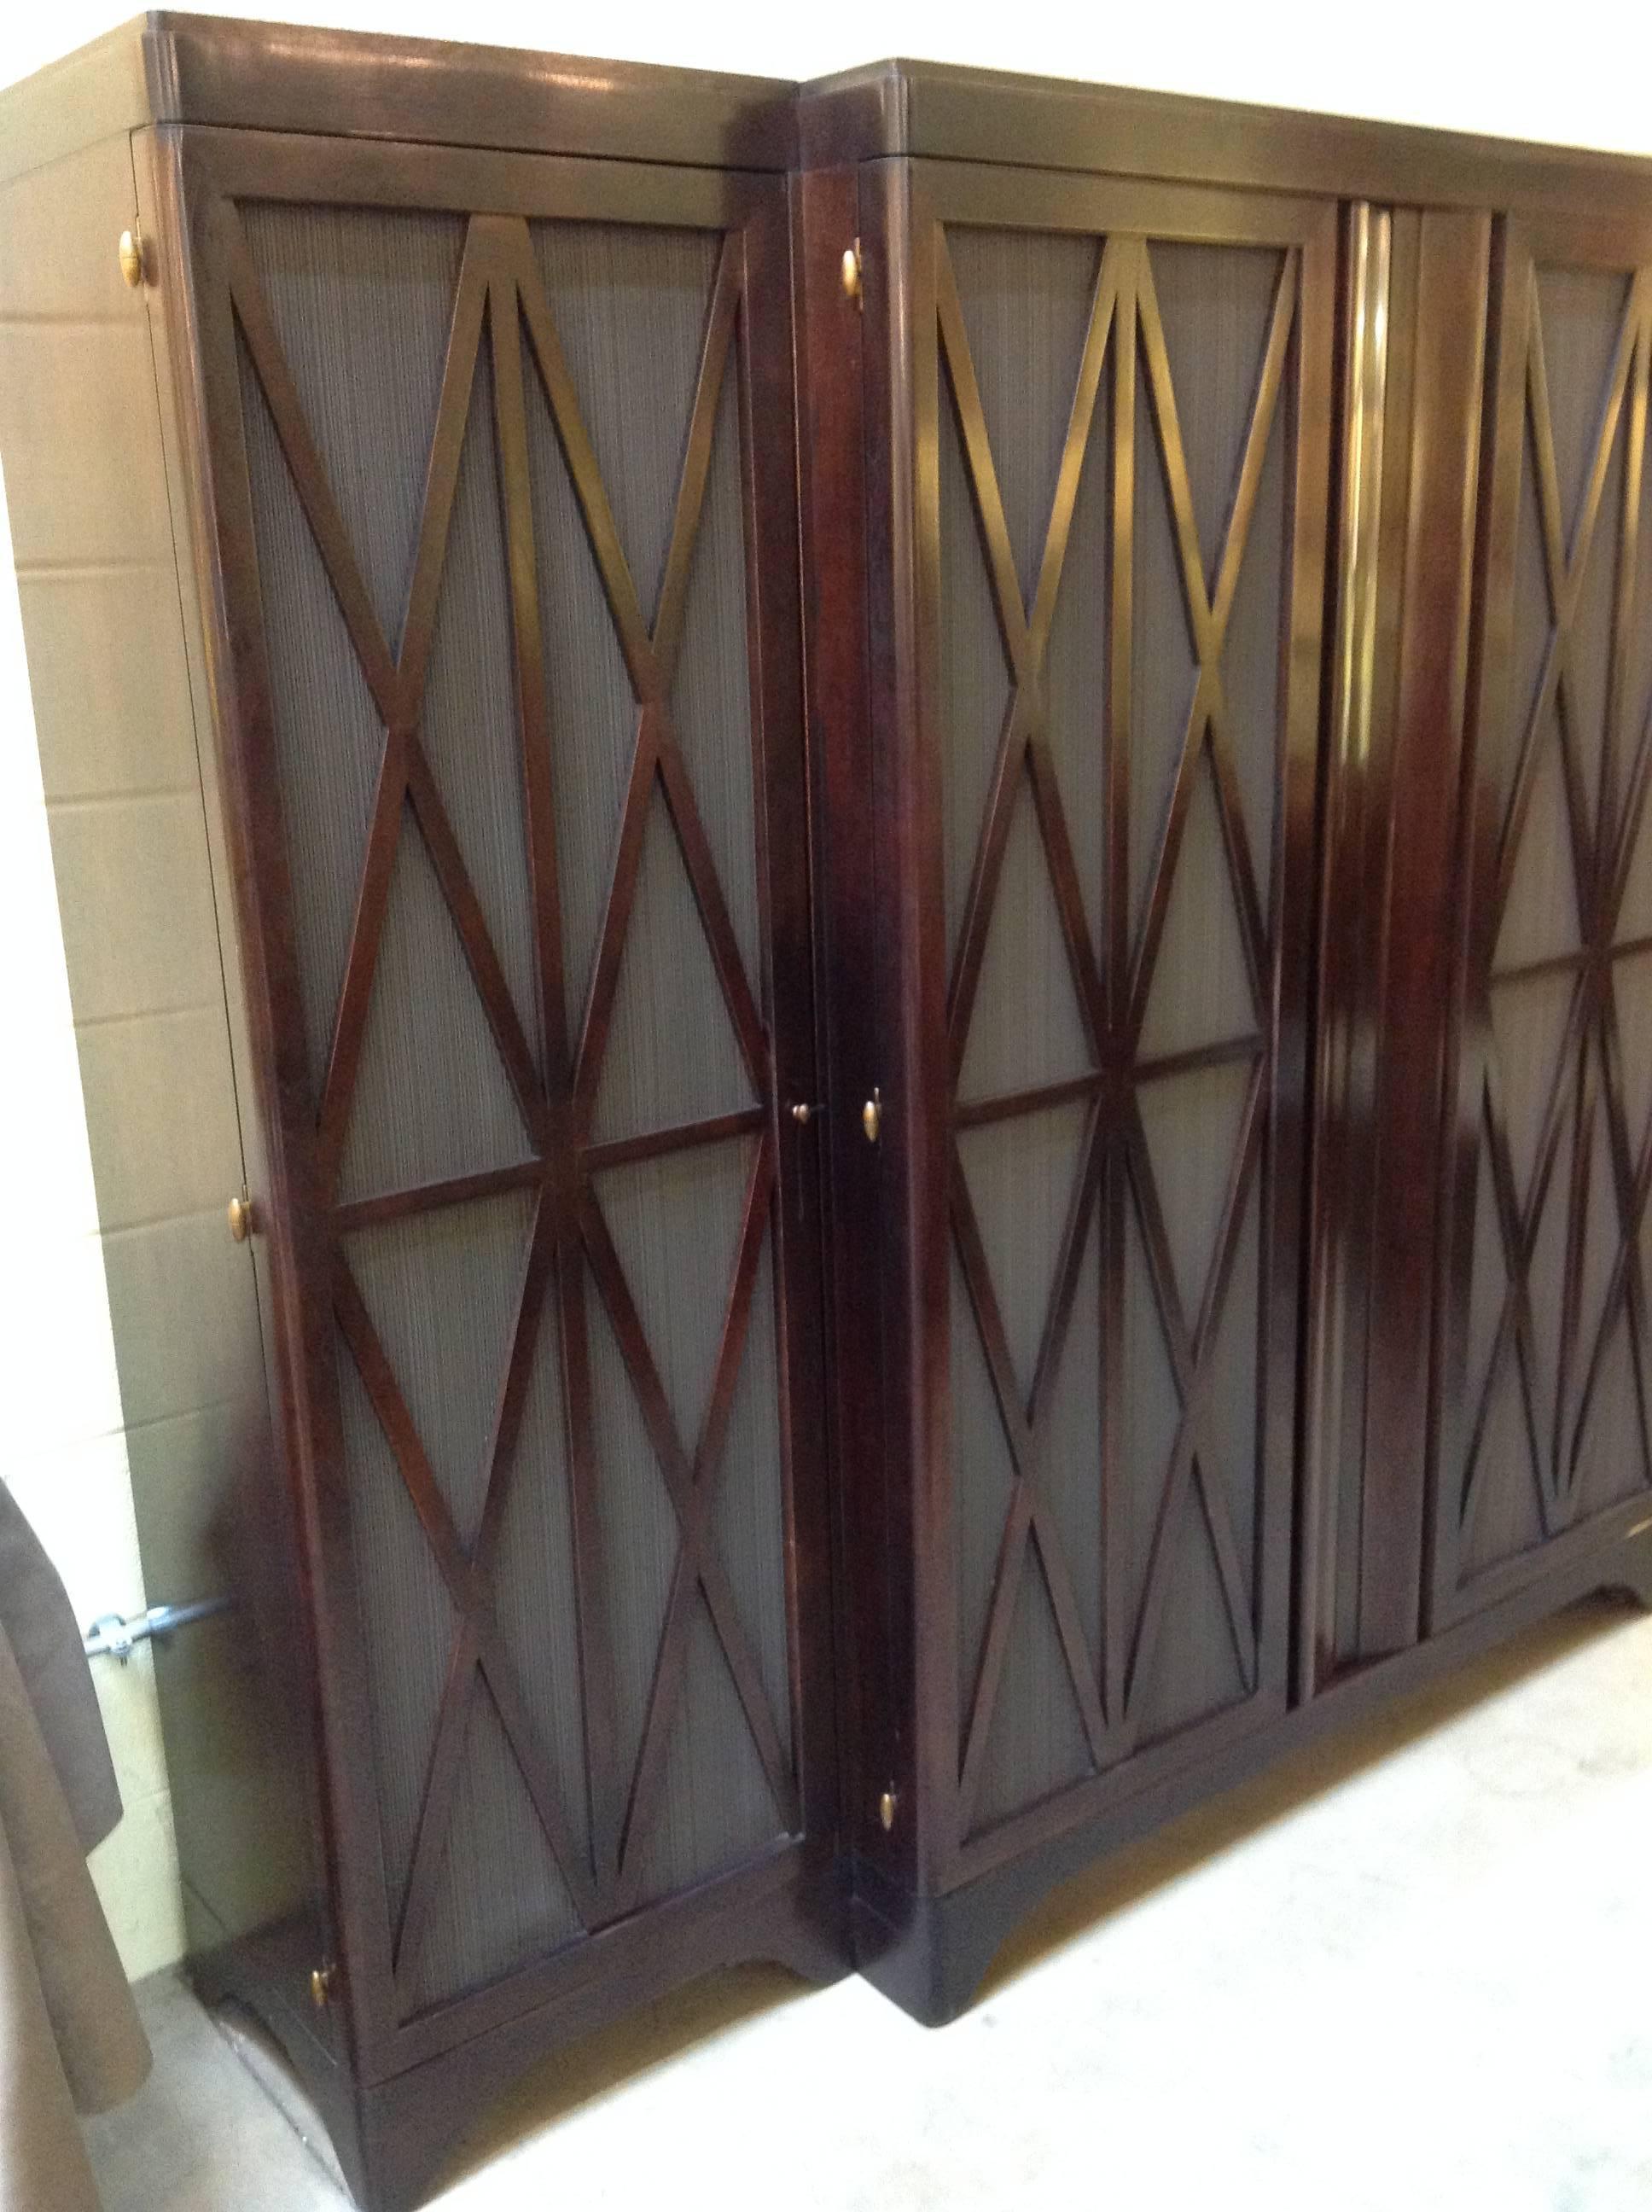 This Barbara Barry realized by Henredon Walnut Entertainment Center is in excellent condition and retailed for over $25k. The doors with x pattern design open all the way back for a clean sleek look and the material on the front doors allows sound